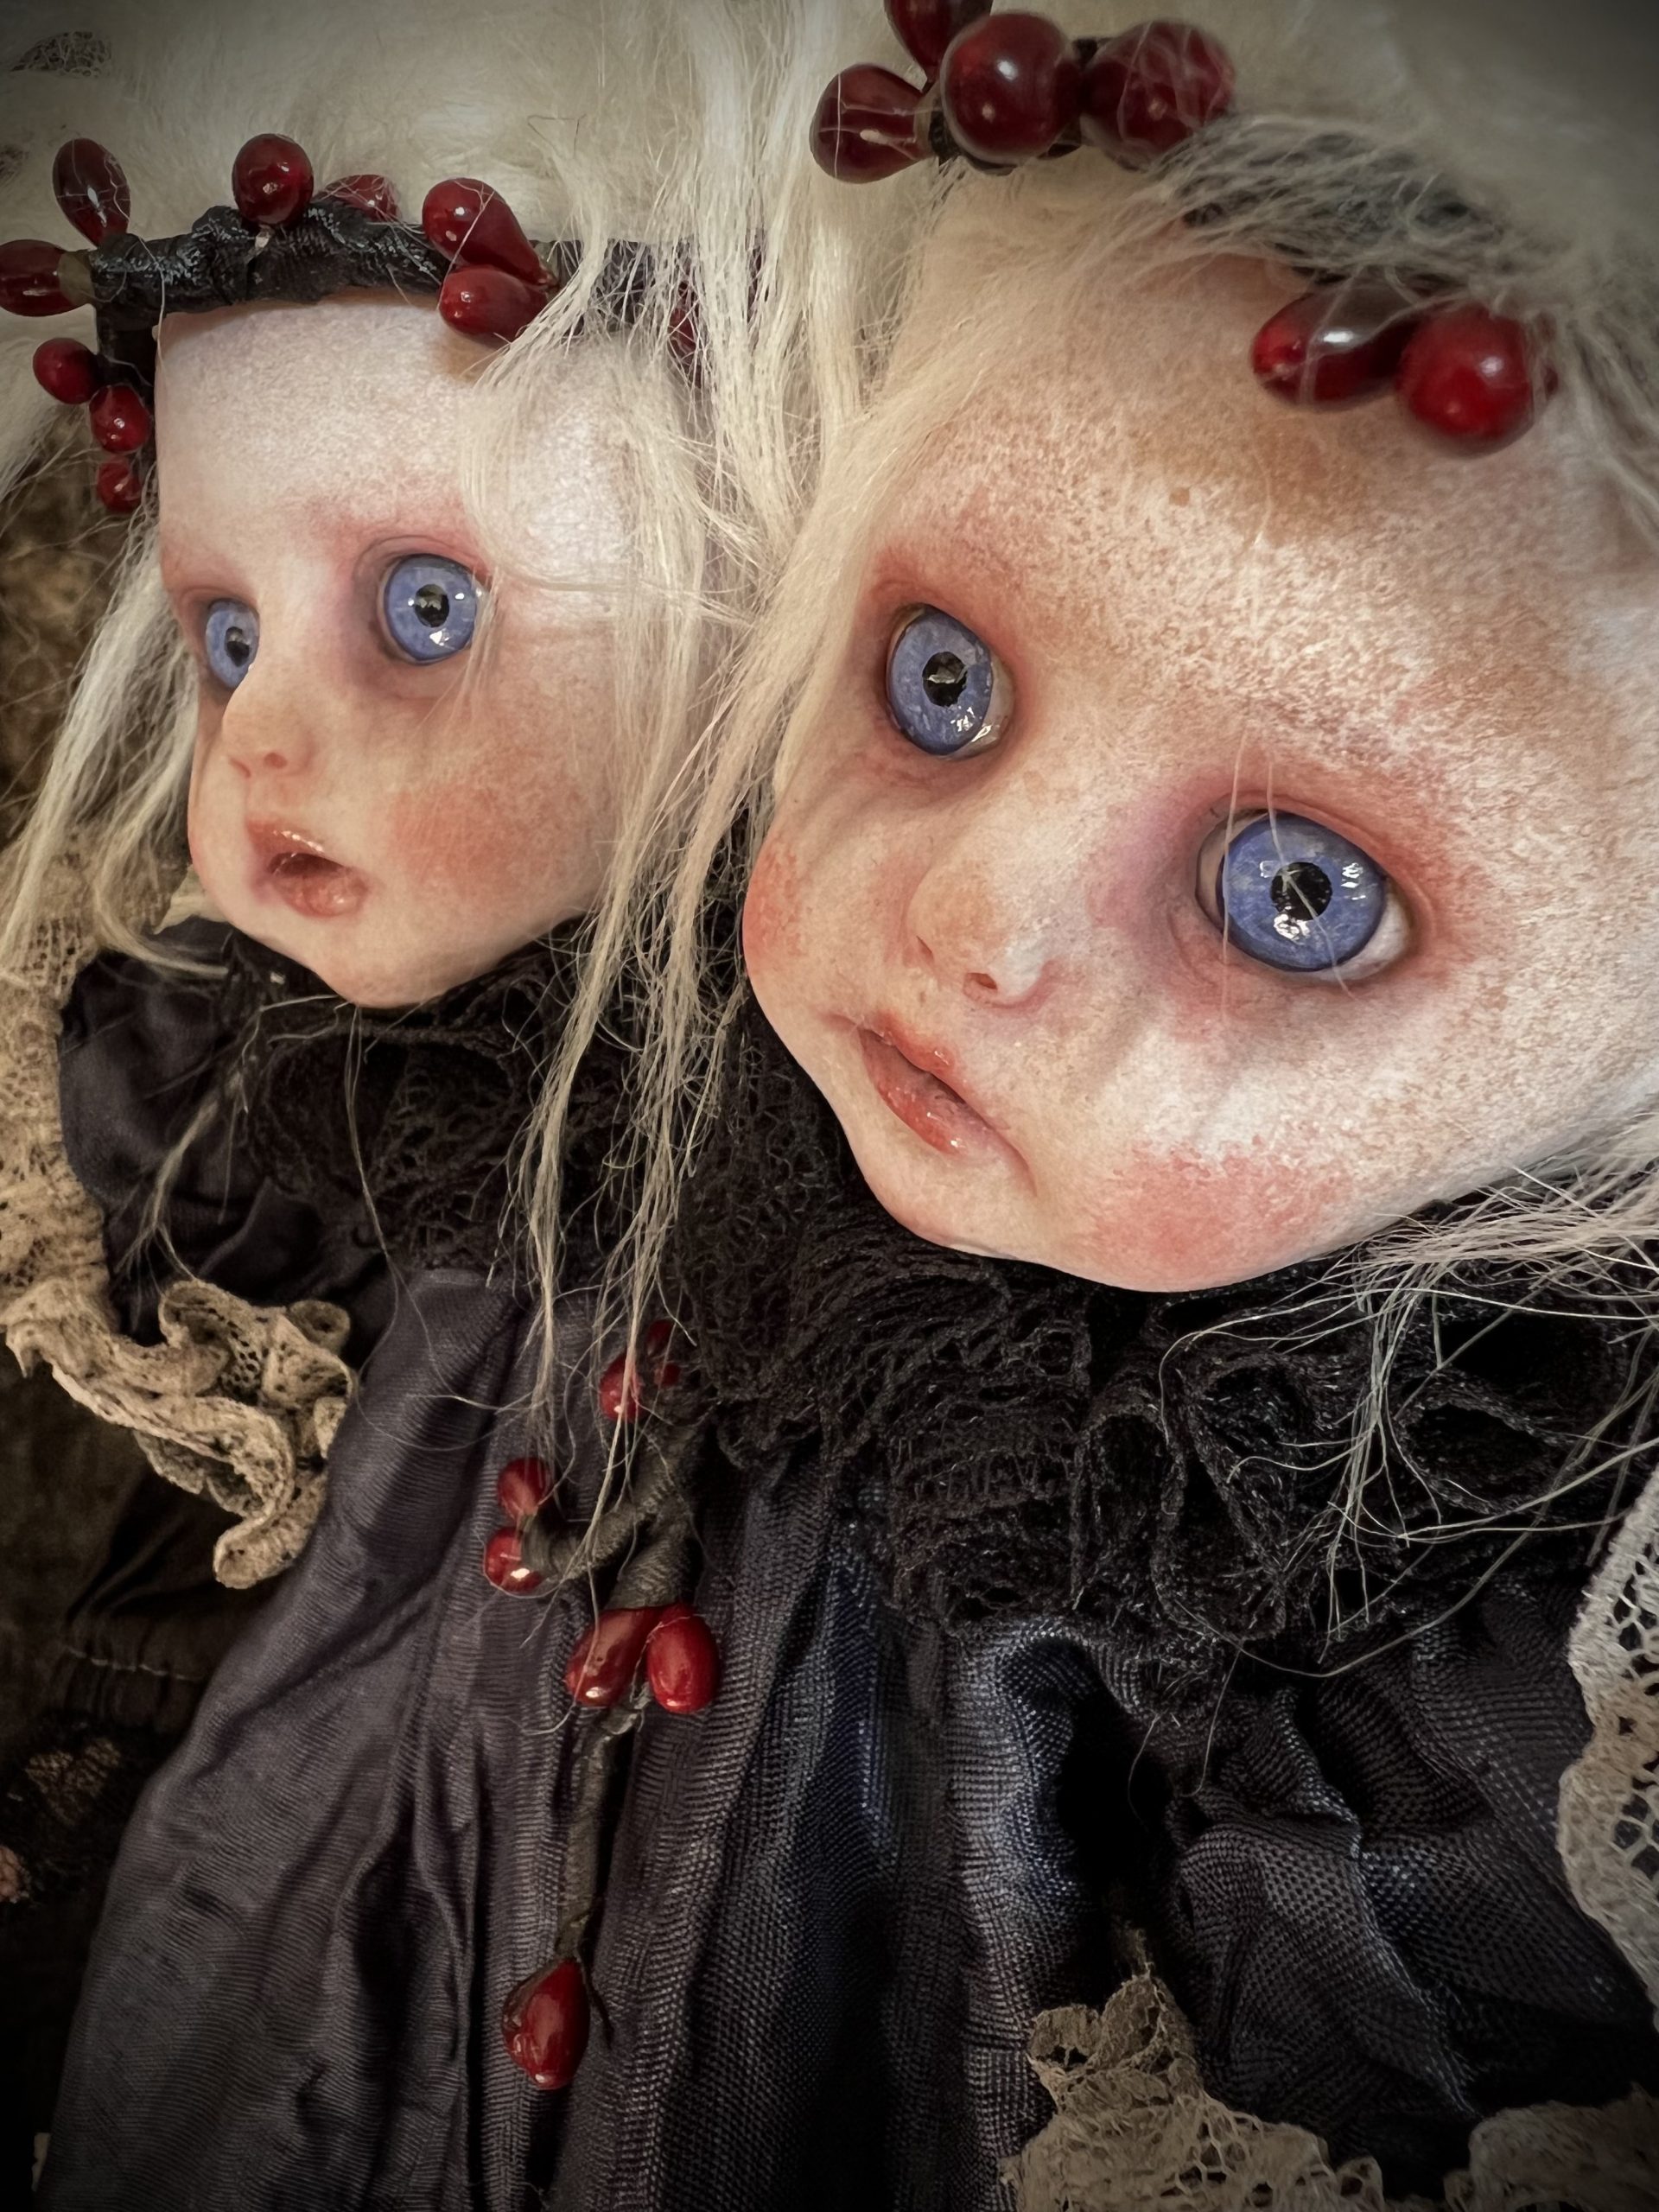 close up Conjoined Twins art doll gothic holiday themed blond with blue eyes